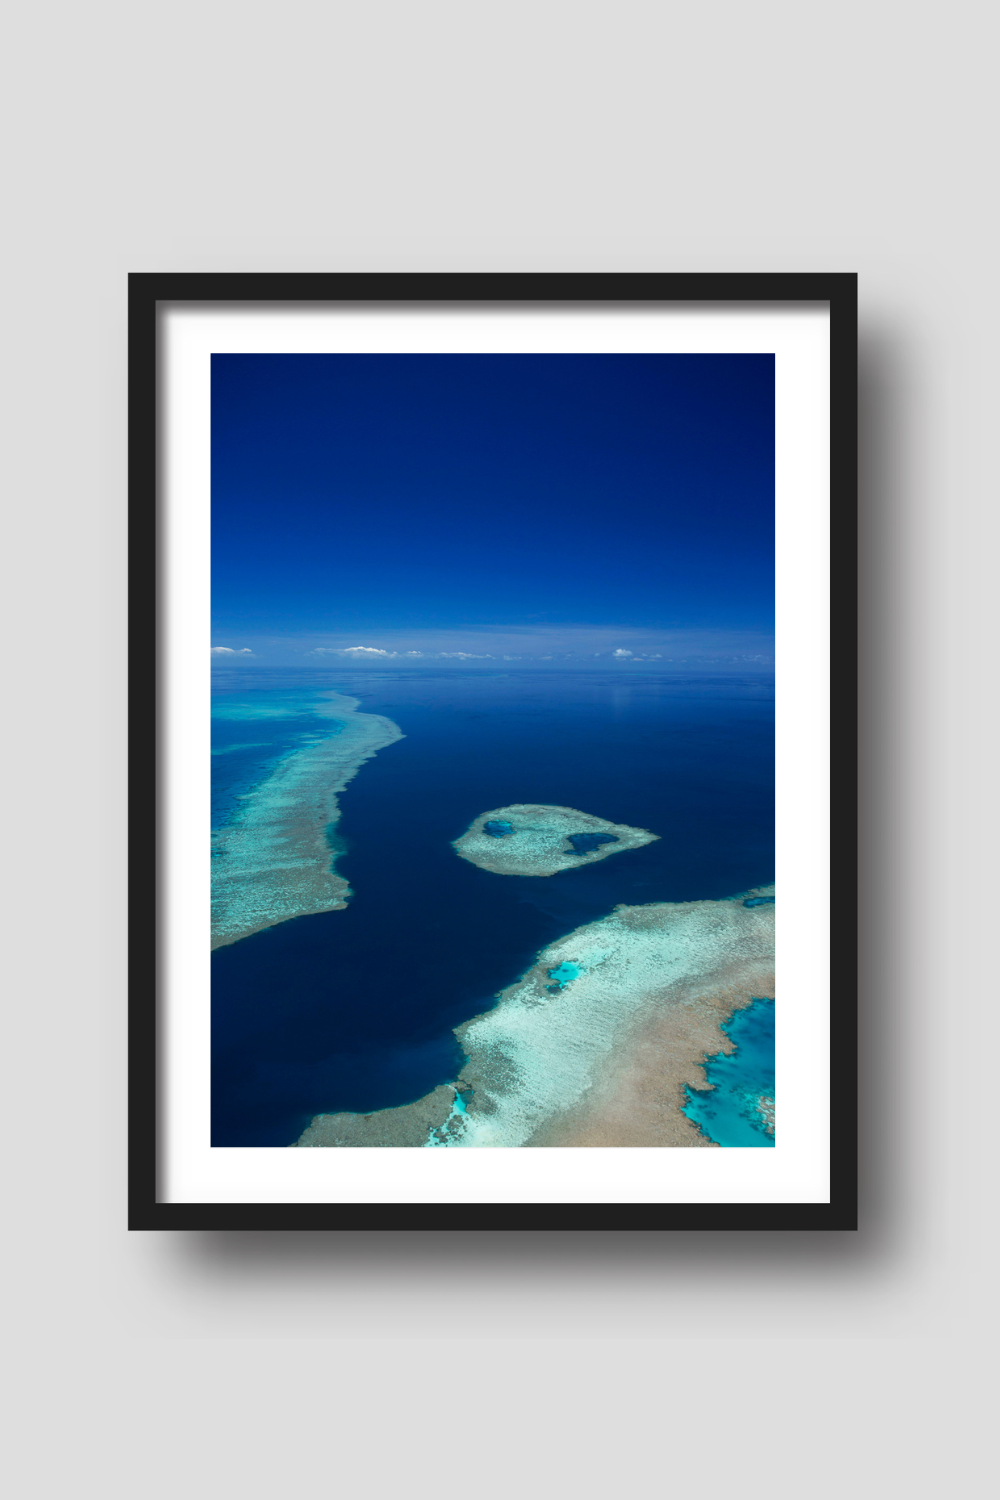 aerial of blue ocean and sky with fringing reef and an island of coral reef creating turquiose coloured water 